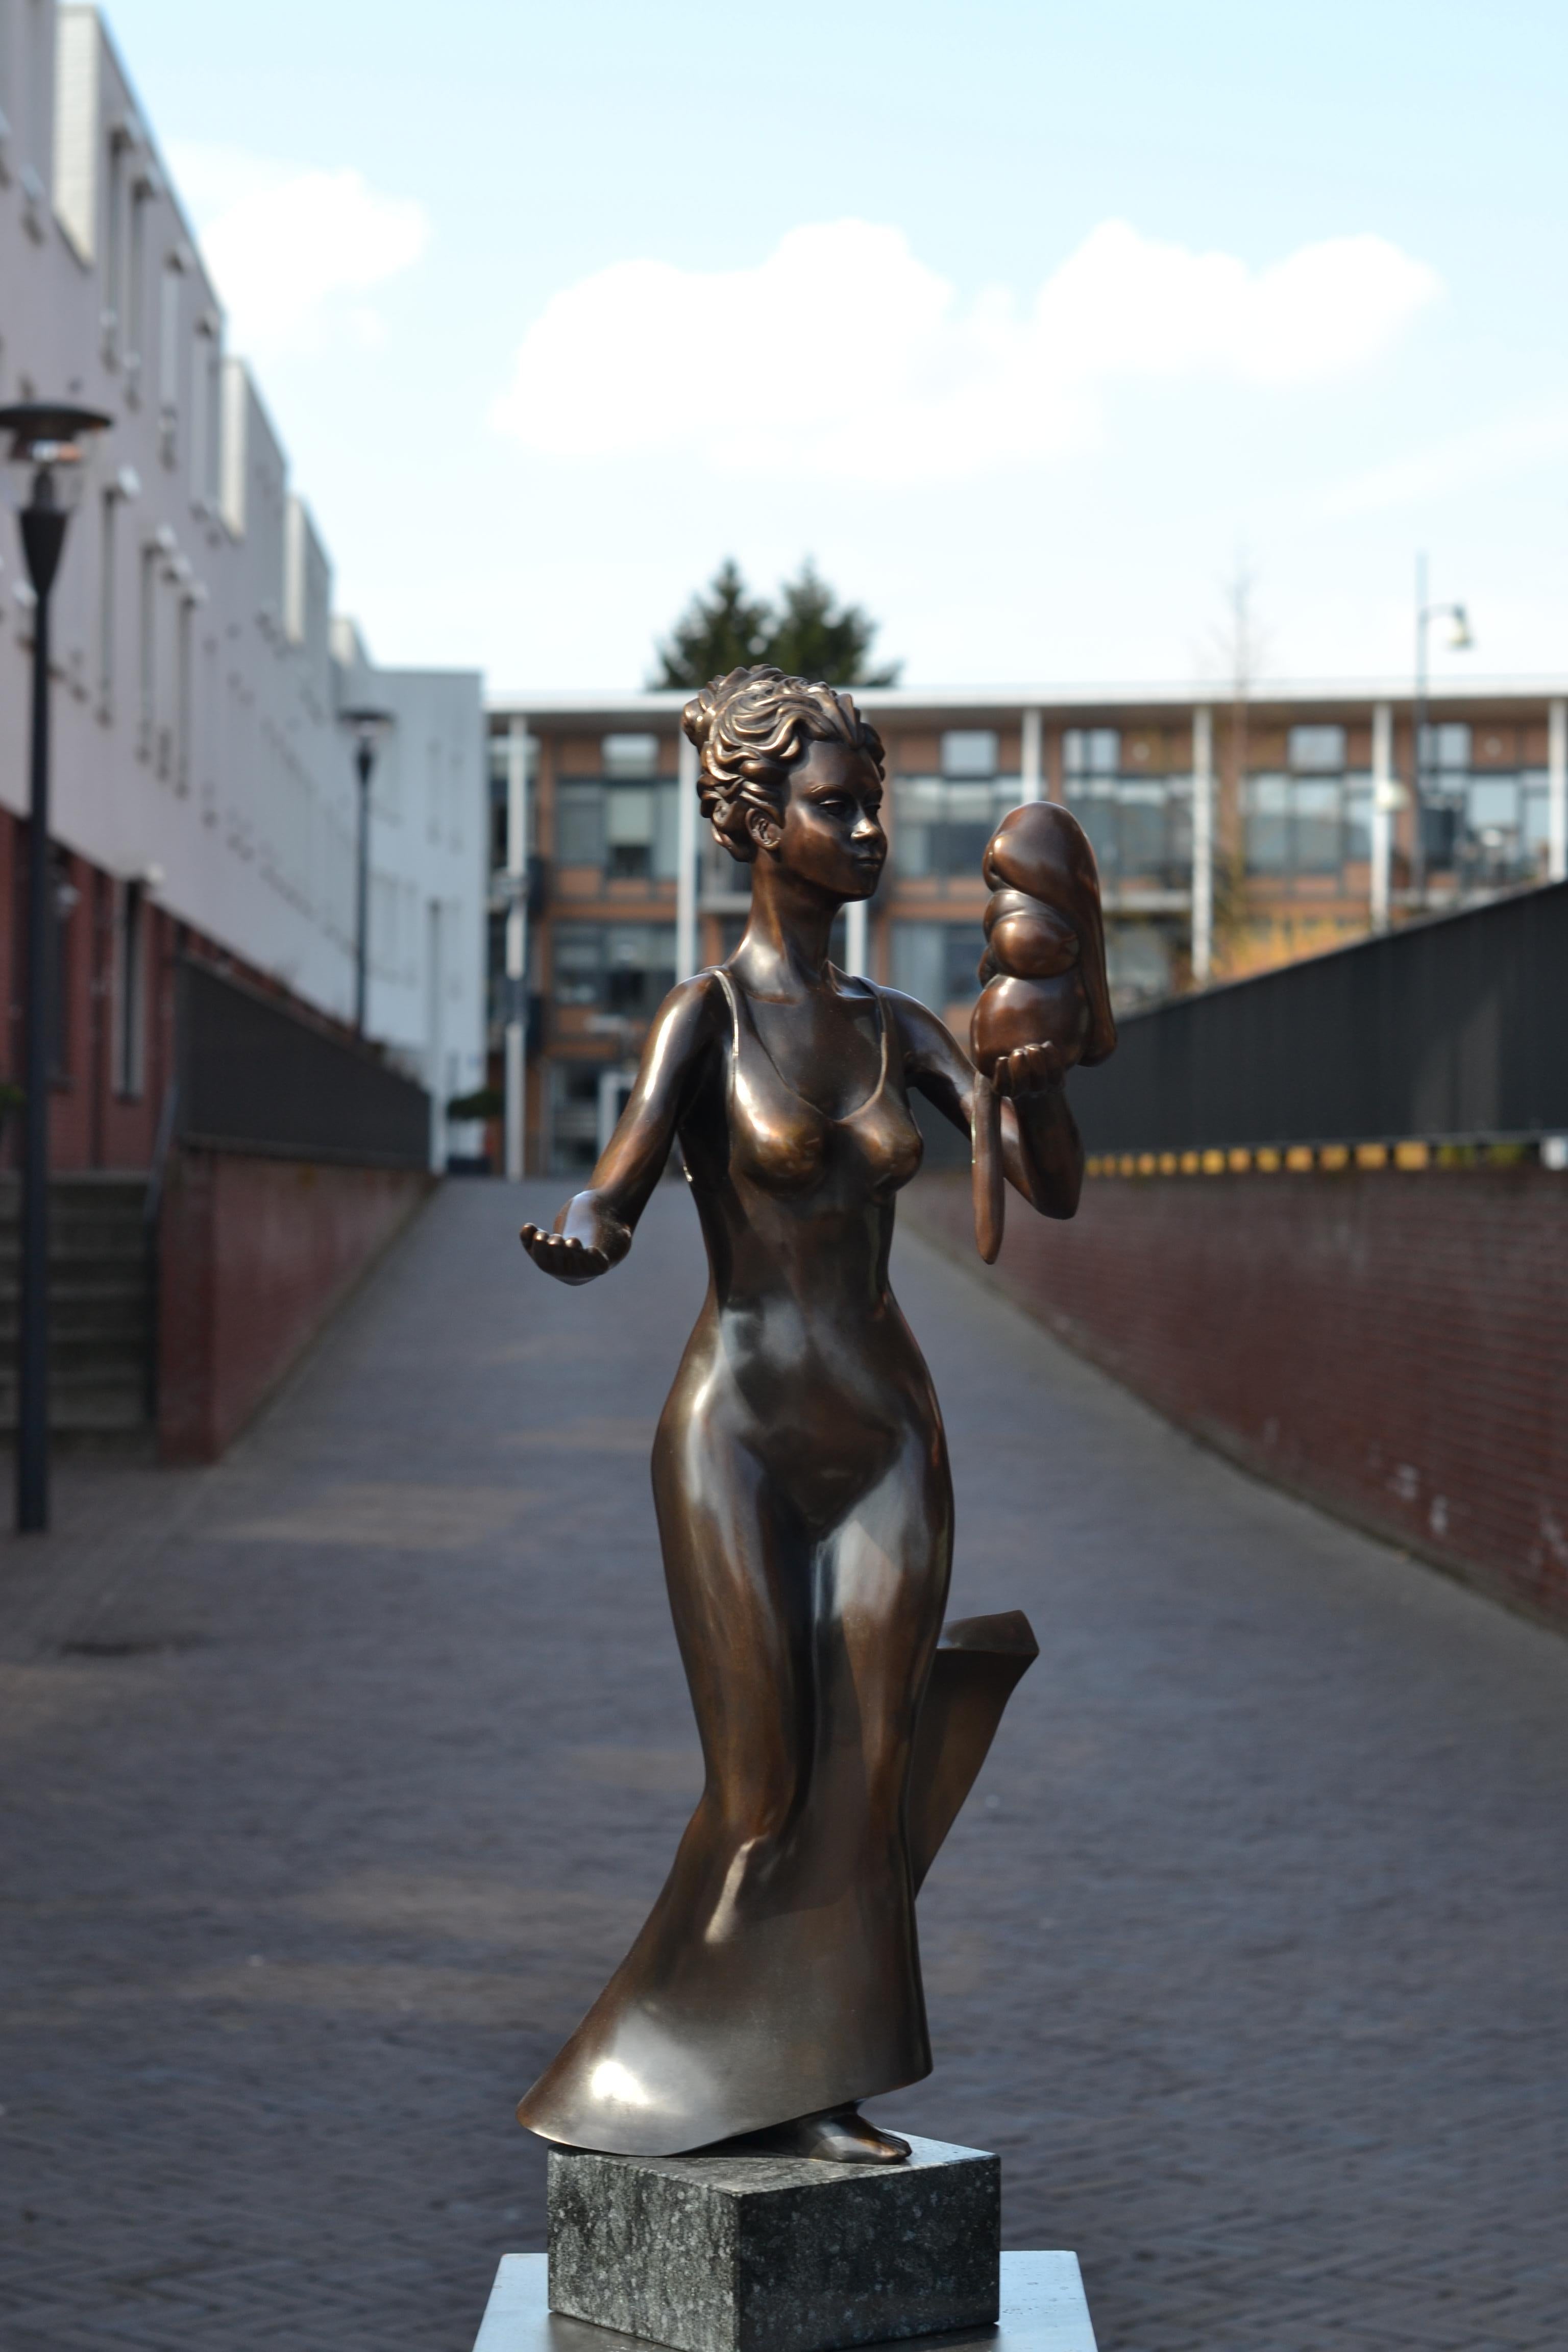 Reflectia, Woman with Monkey- 21st Century Contemporary Bronze Female Sculpture - Gold Figurative Sculpture by Frans van Straaten